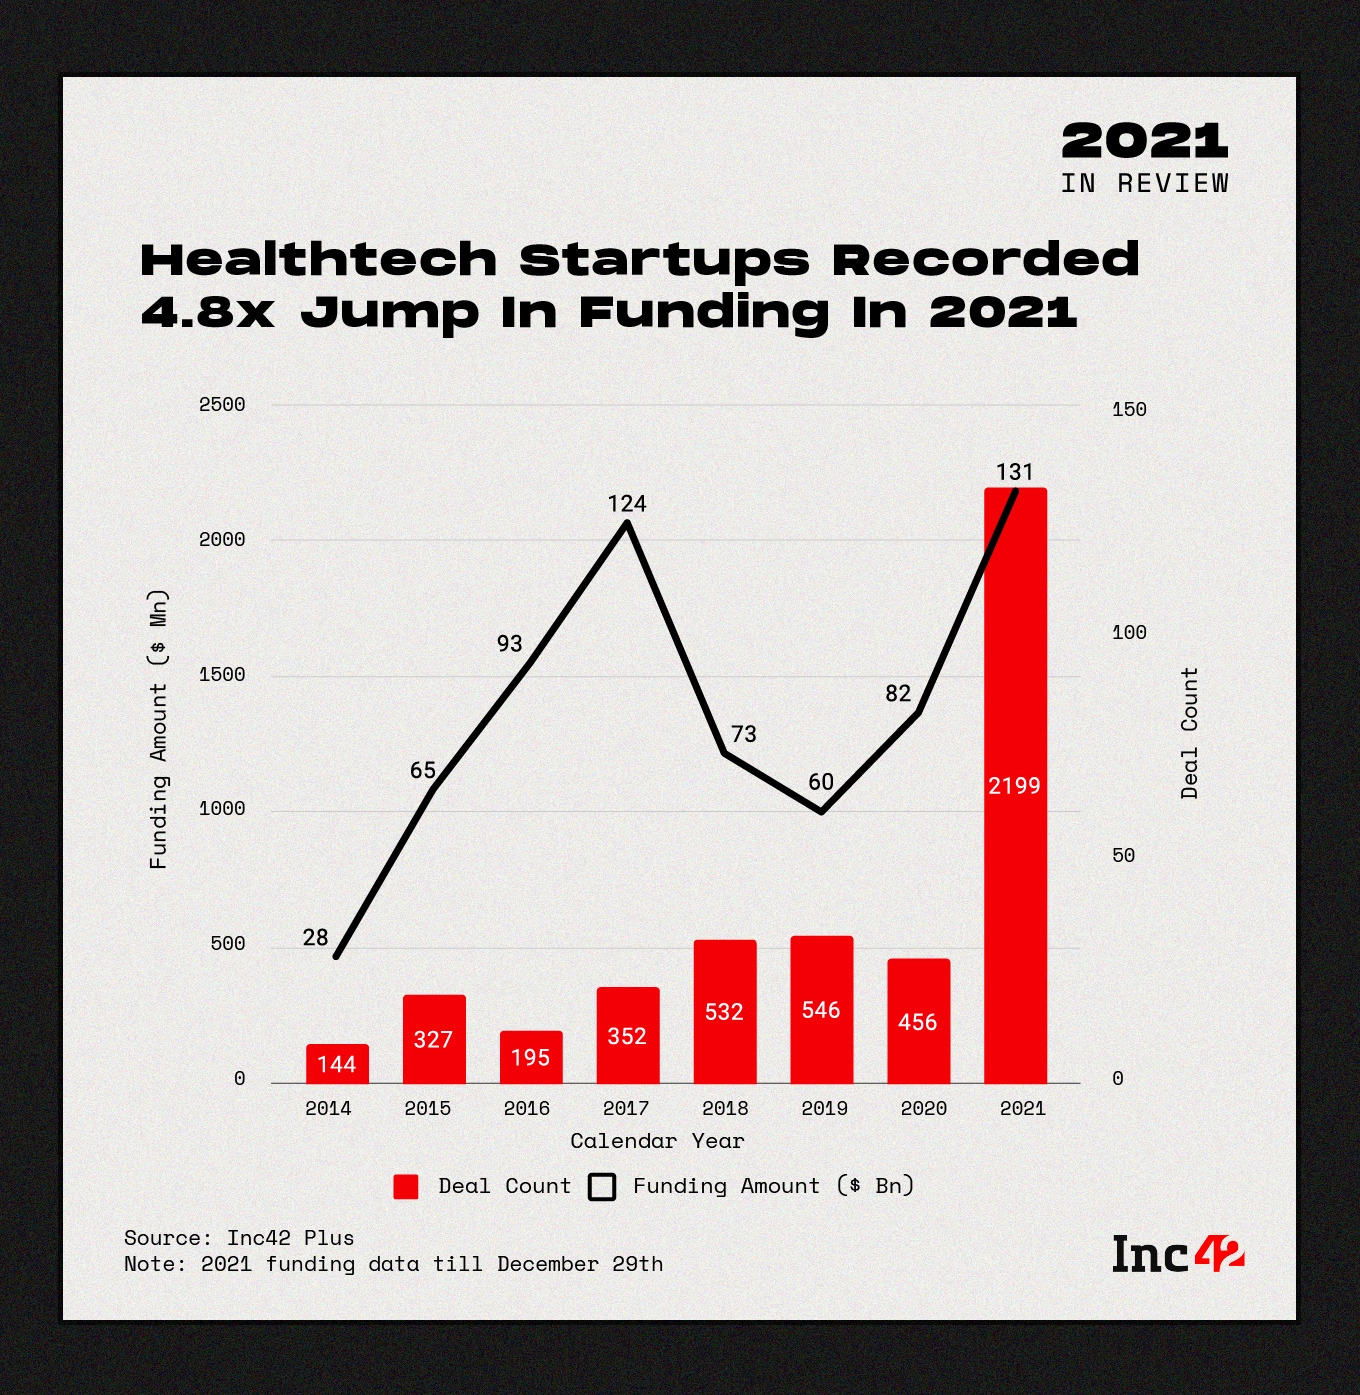 Healthtech startups recorded jump in funding 2021